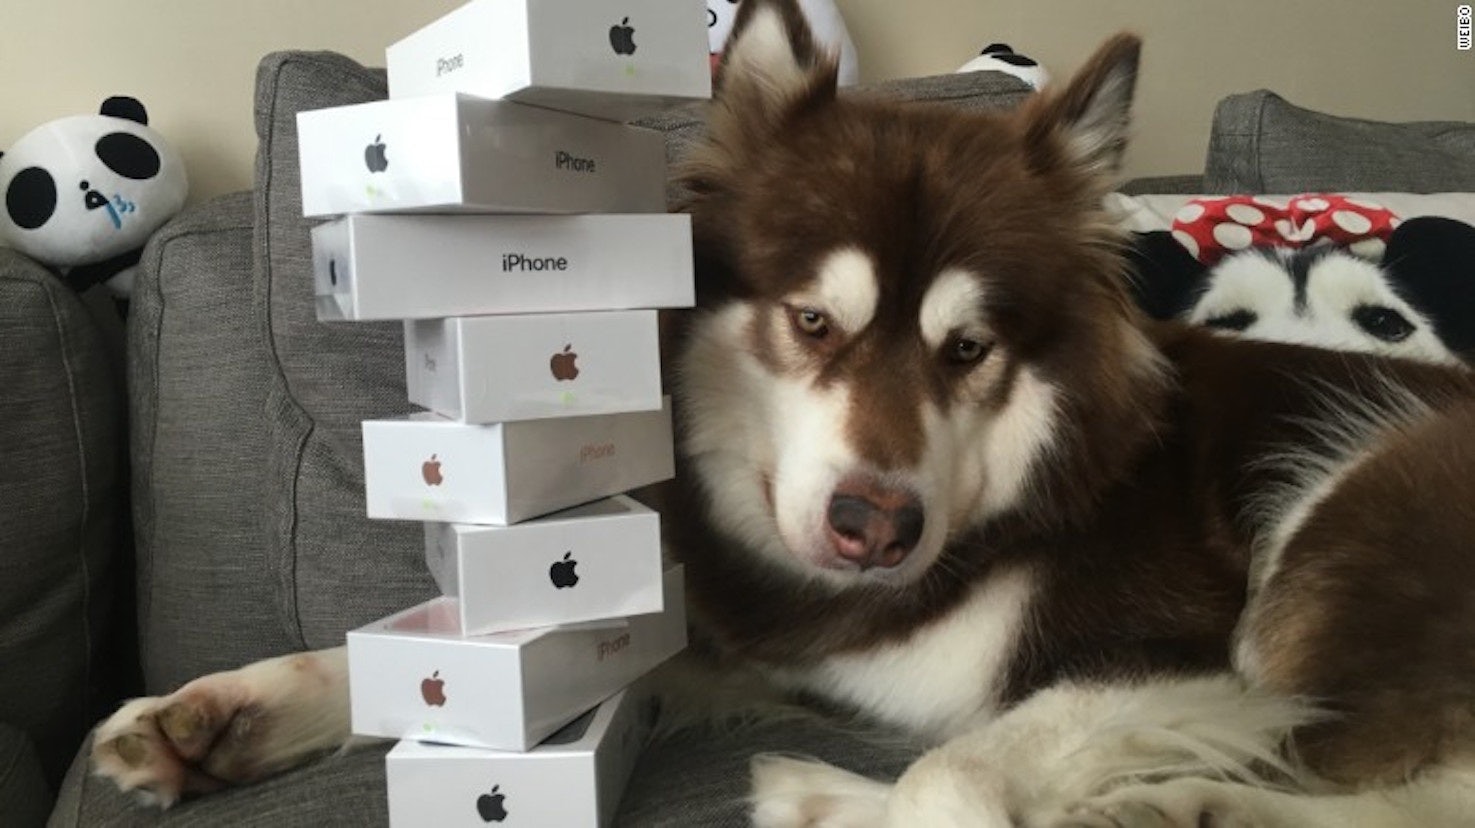 A photo posted by Wang Sicong, the son of China's richest person Wang Jianlin, of his dog with a stack of iPhone 7s he purchased for it as a "gift." A new report says that it is difficult for Chinese billionaires to find a "suitable" heir who can handle their legacy. (Weibo)